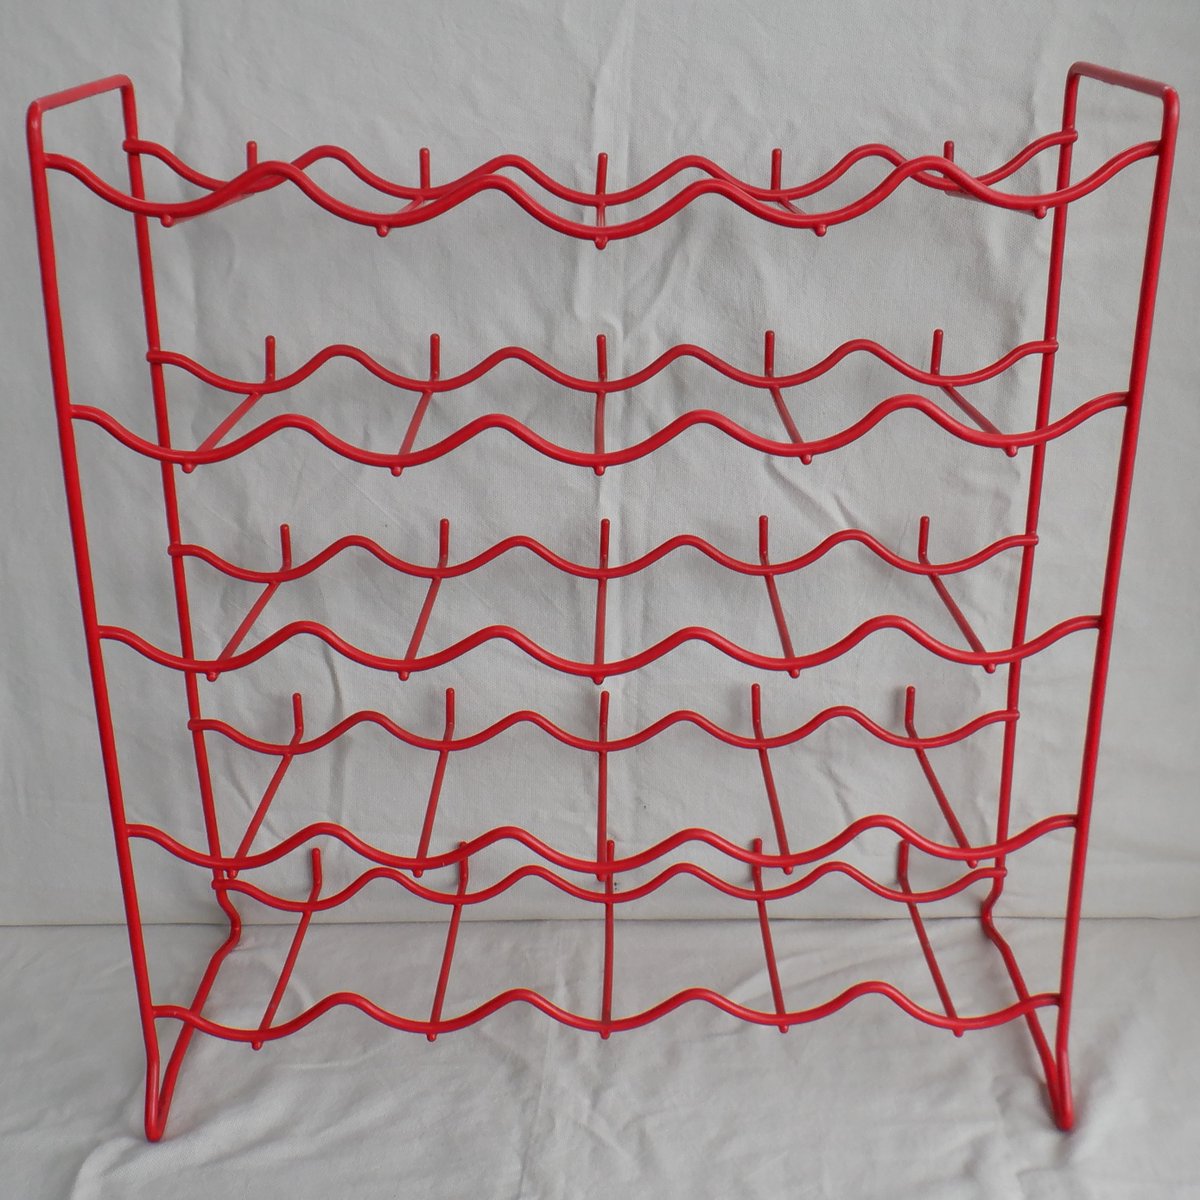 Here we have a vintage red plastic coated wire framed wine rack. It looks like a 1960s one made by Happymaid. 🍷🍾 🛒 ebay.co.uk/itm/1763638365… #Vintage #FollowVintage #Happymaid #1960s #eBay